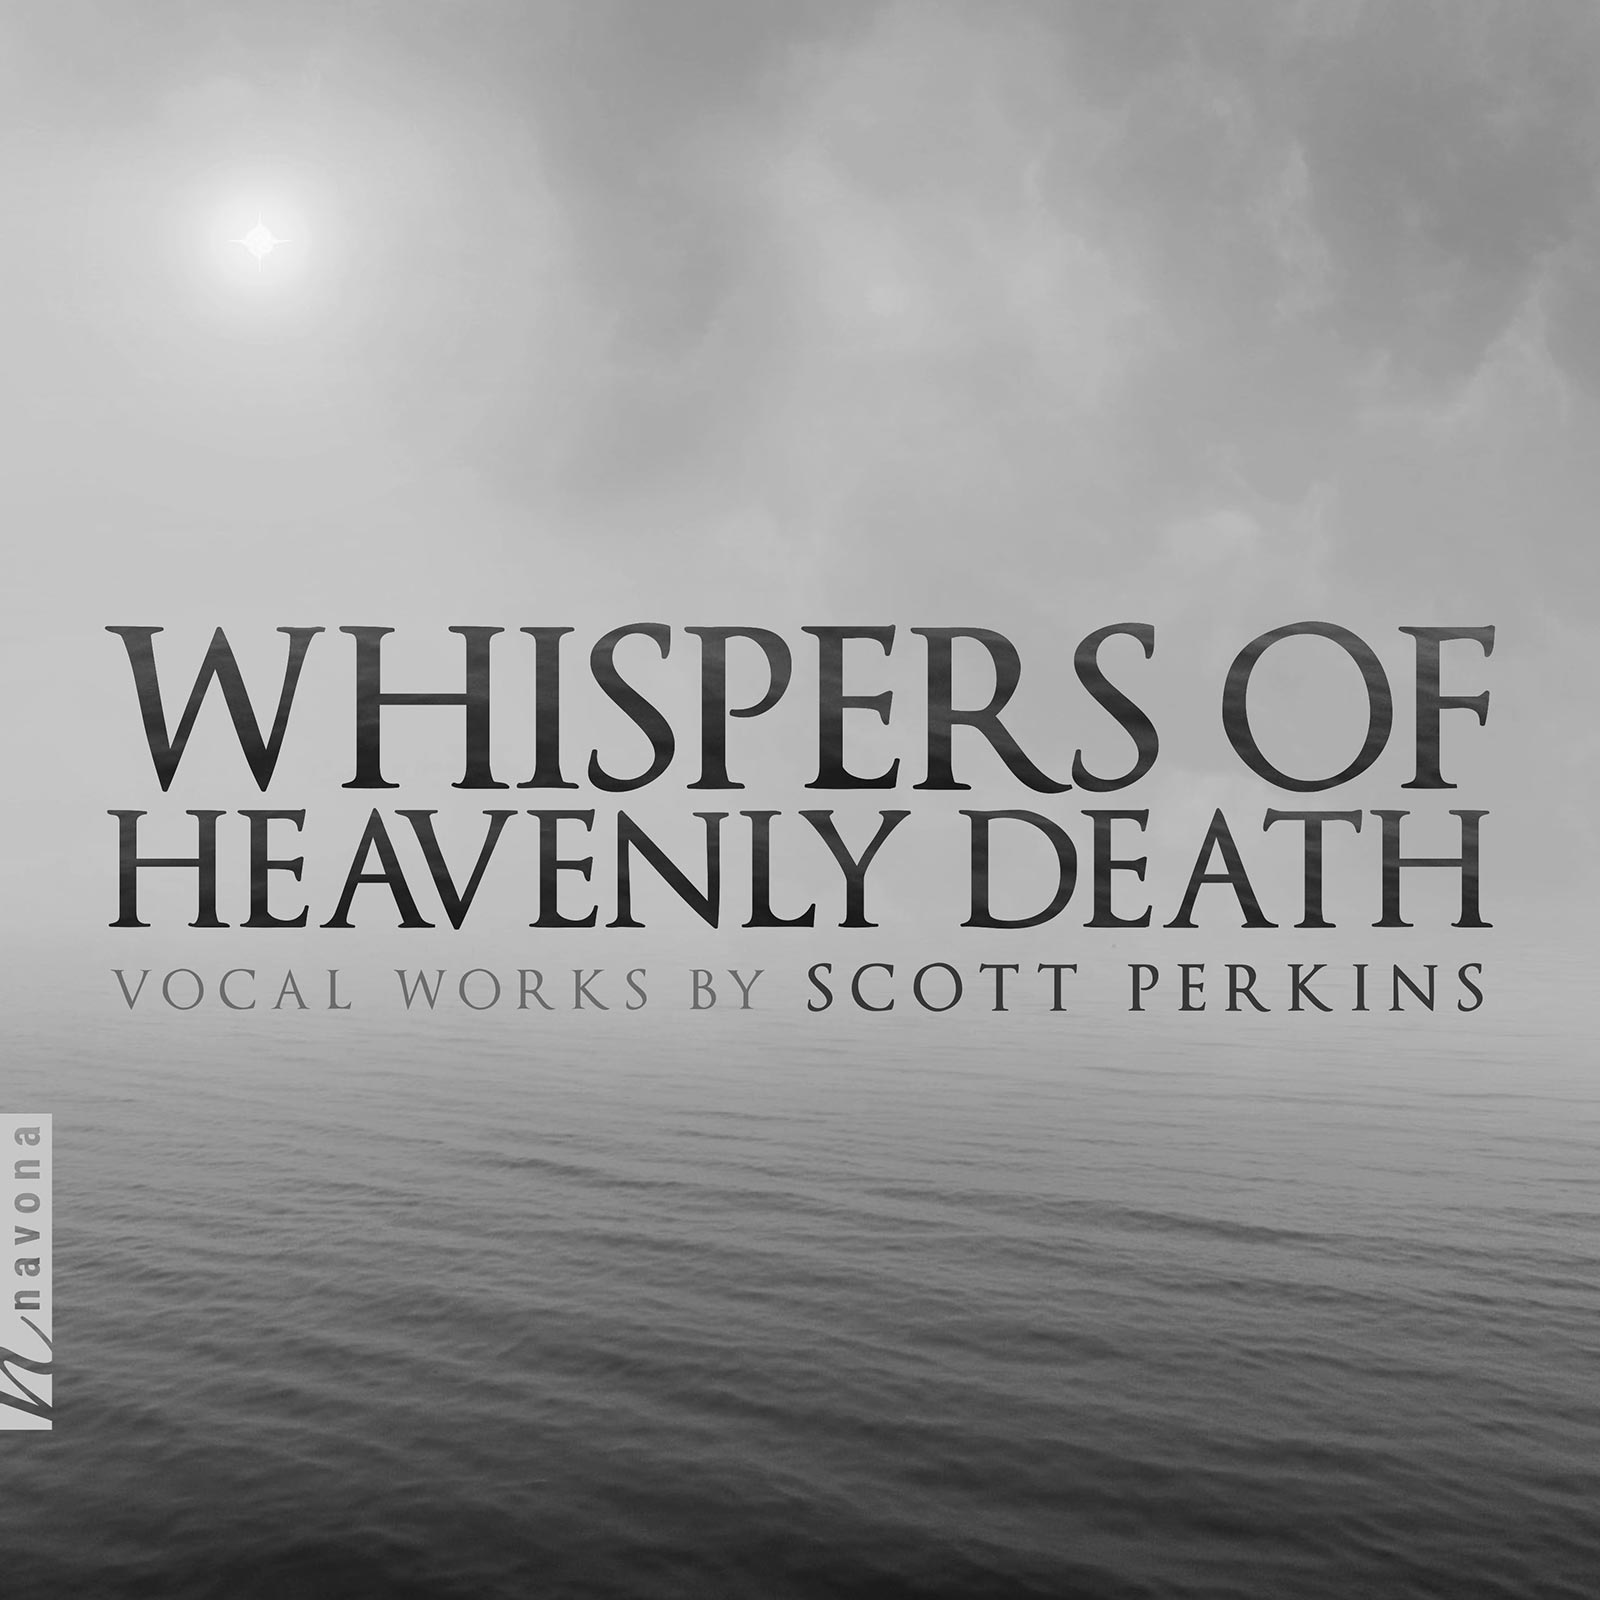 Whispers of Heavenly Death